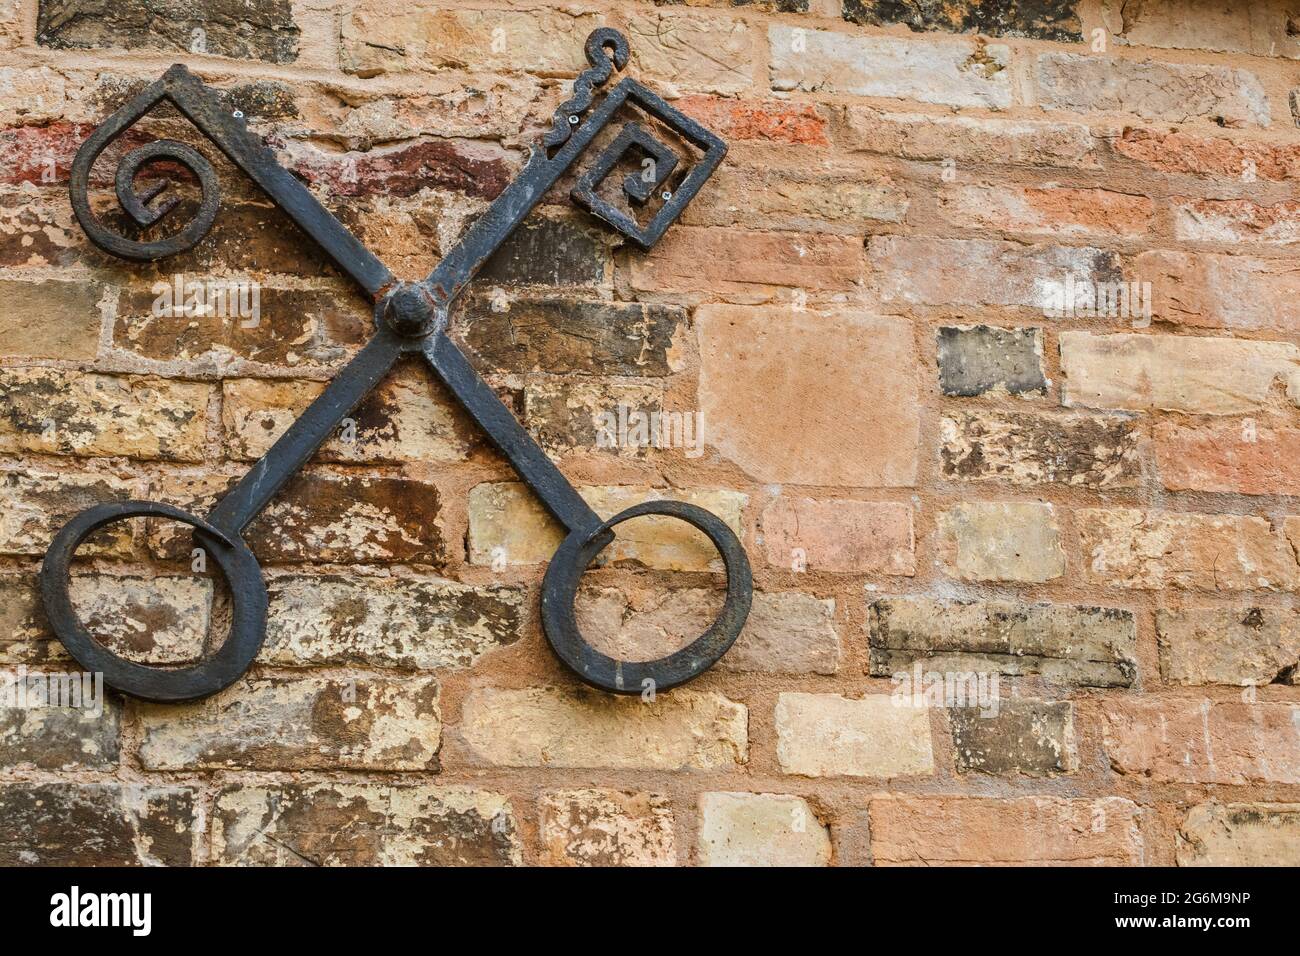 Iron cross keys on old brick wall at Peterhouse  Cambridge. Keys of Heaven refers to the image of crossed keys used in ecclesiastical heraldry, Stock Photo